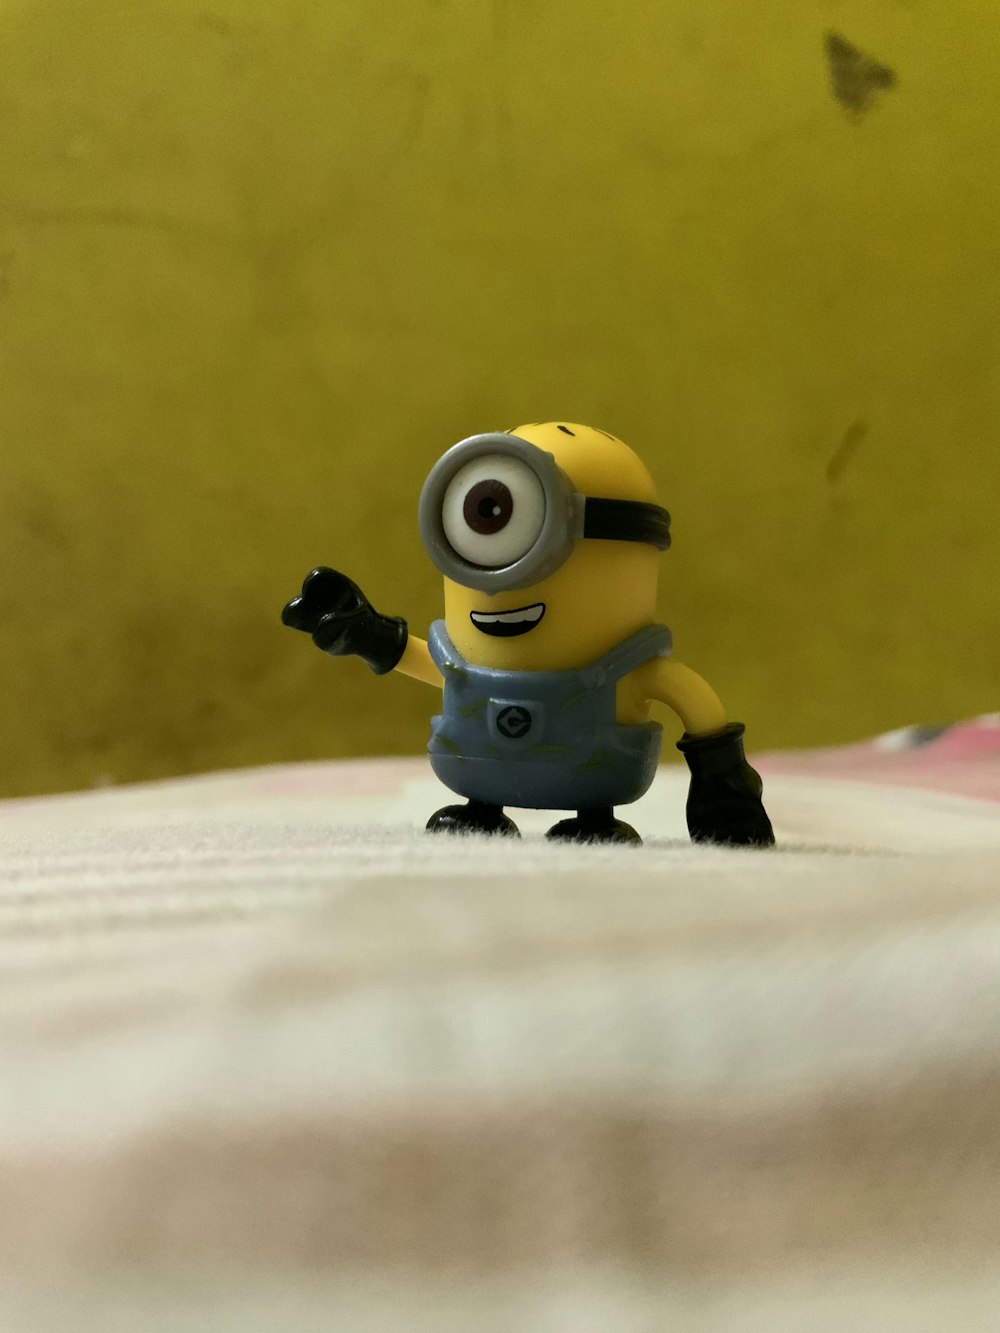 a toy minion is standing on a bed